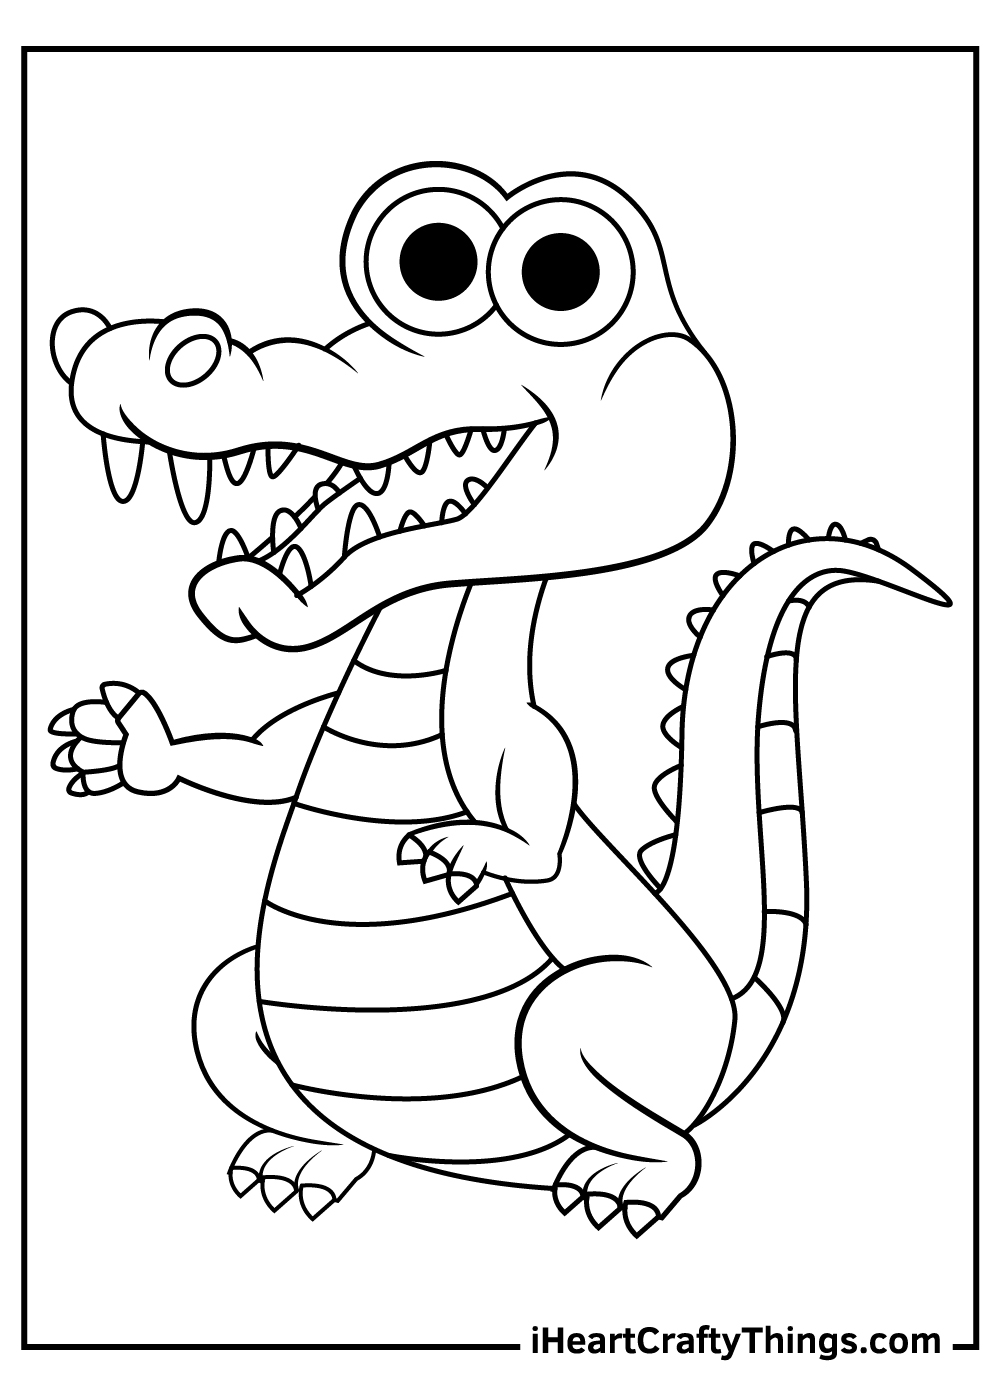 Printable Alligators Coloring Pages Updated 20